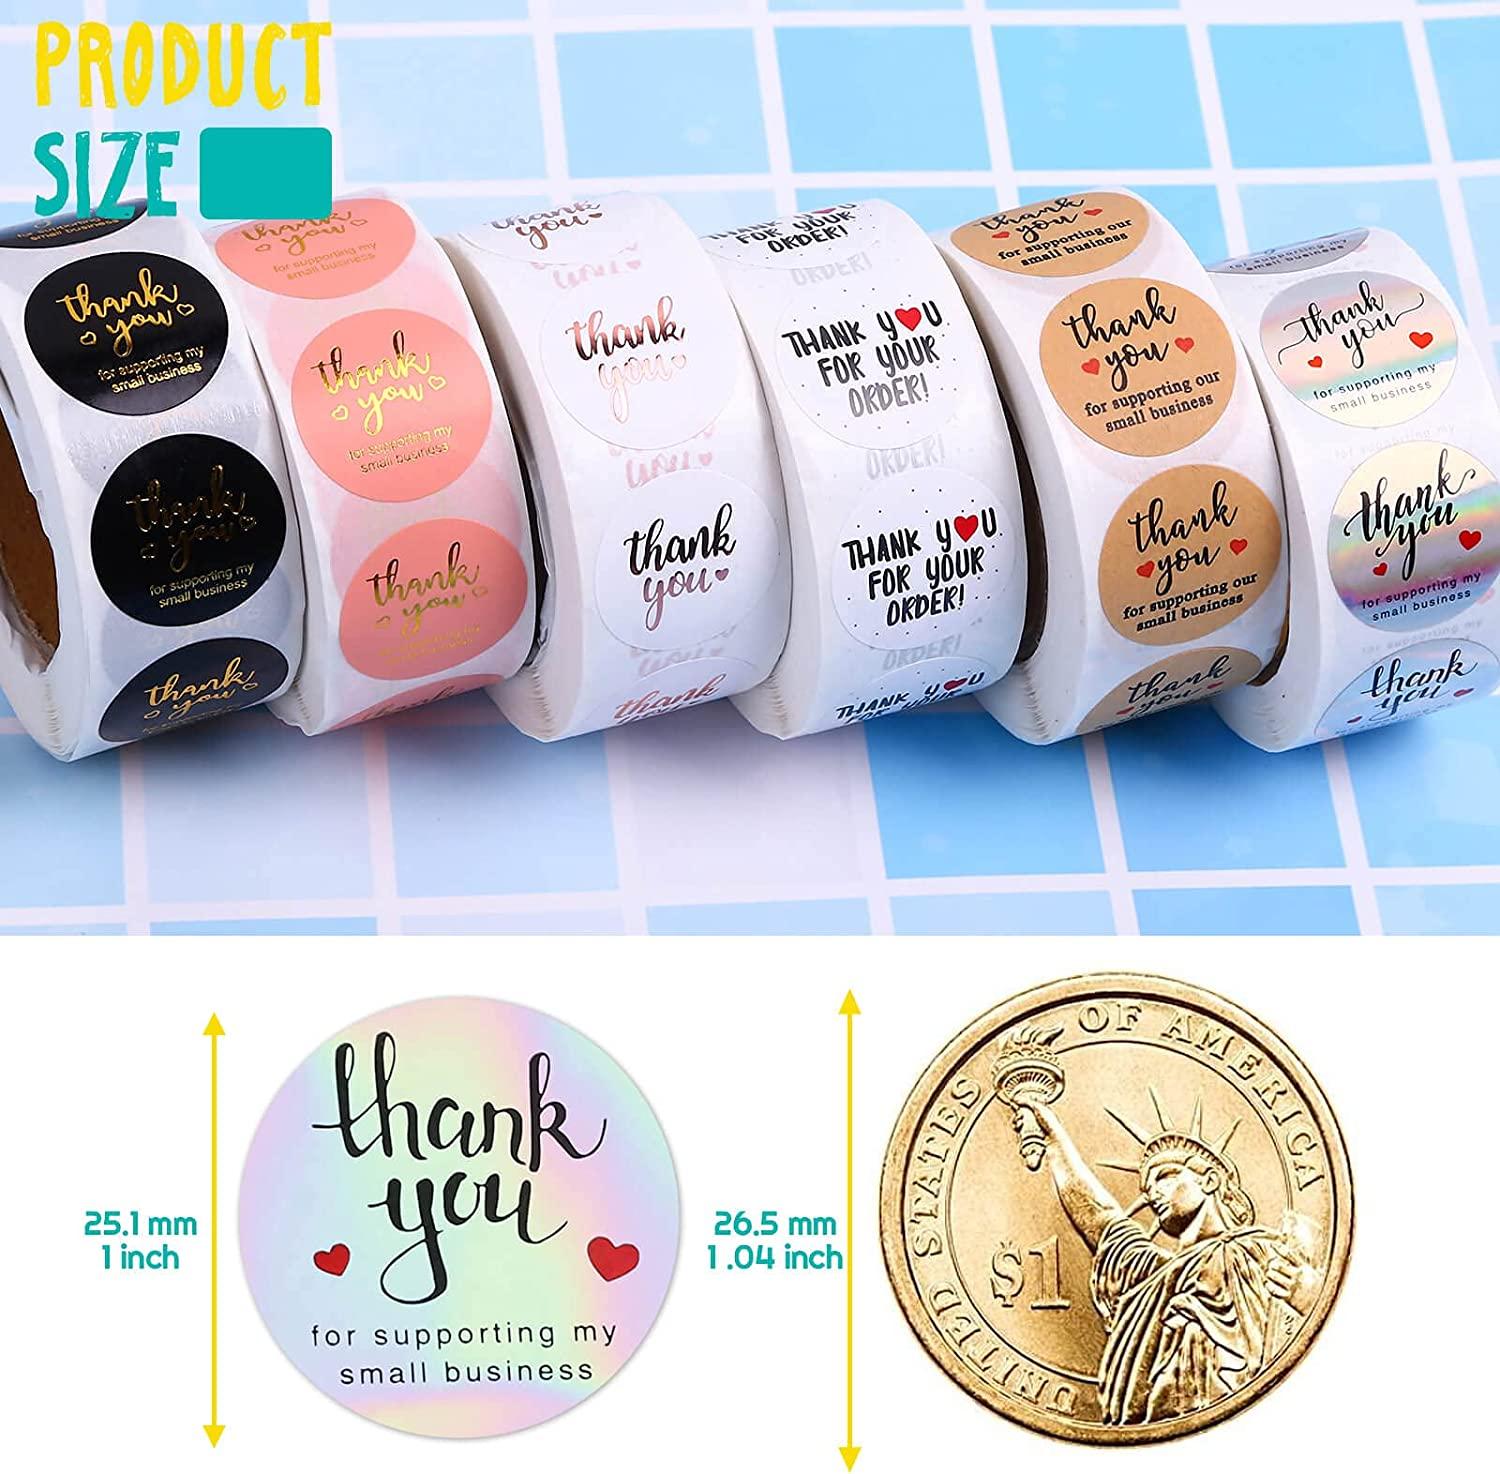 3000pcs Thank You Stickers, Evatage 6 Rolls 1 Inch Thank You Label Stickers  for Small Business with 6 Design, Small Business Supplies for Packaging,  Envelopes, Gift Wraps and Crafts